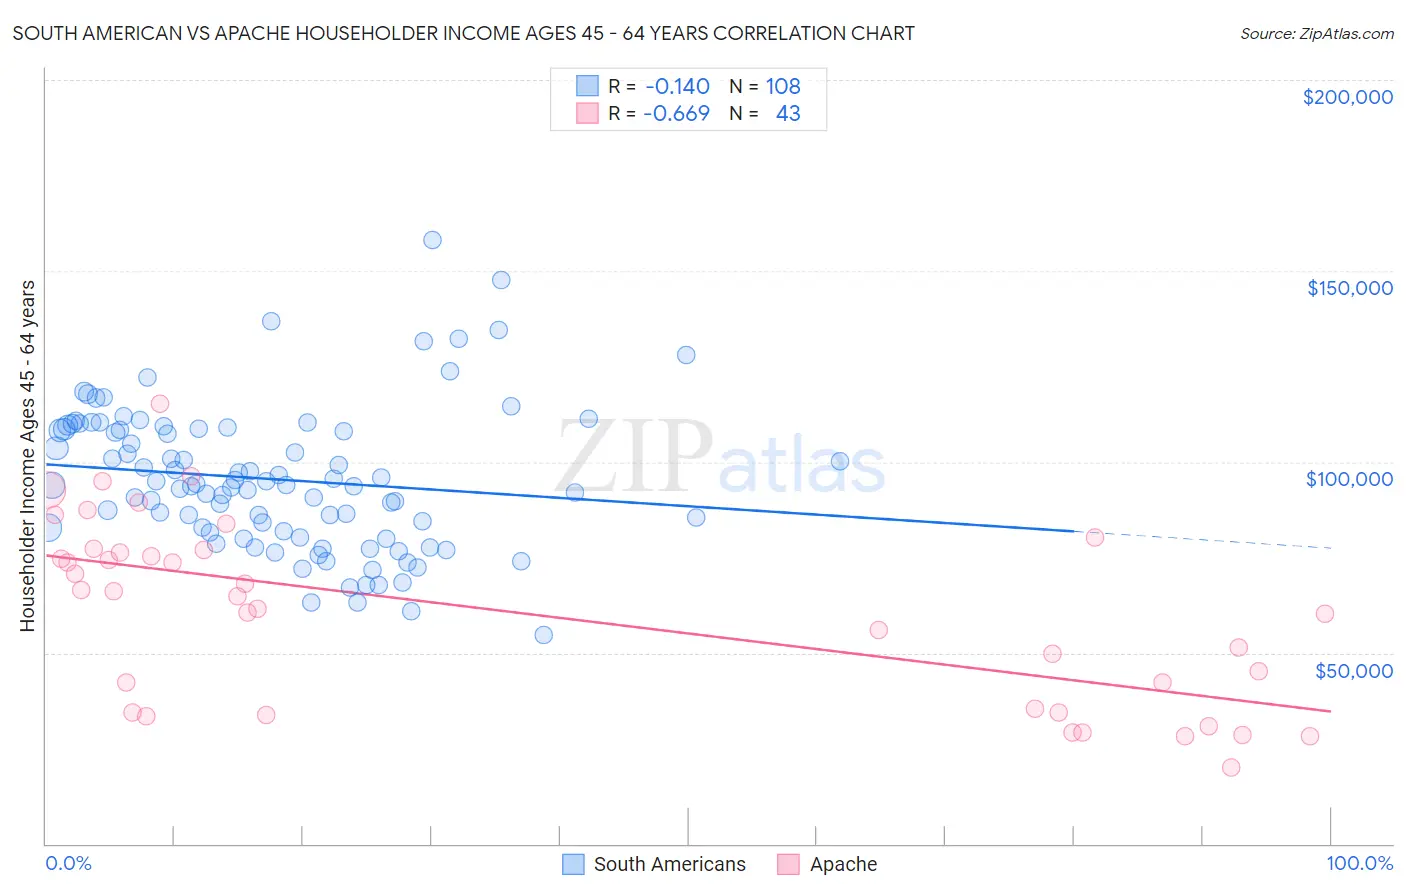 South American vs Apache Householder Income Ages 45 - 64 years